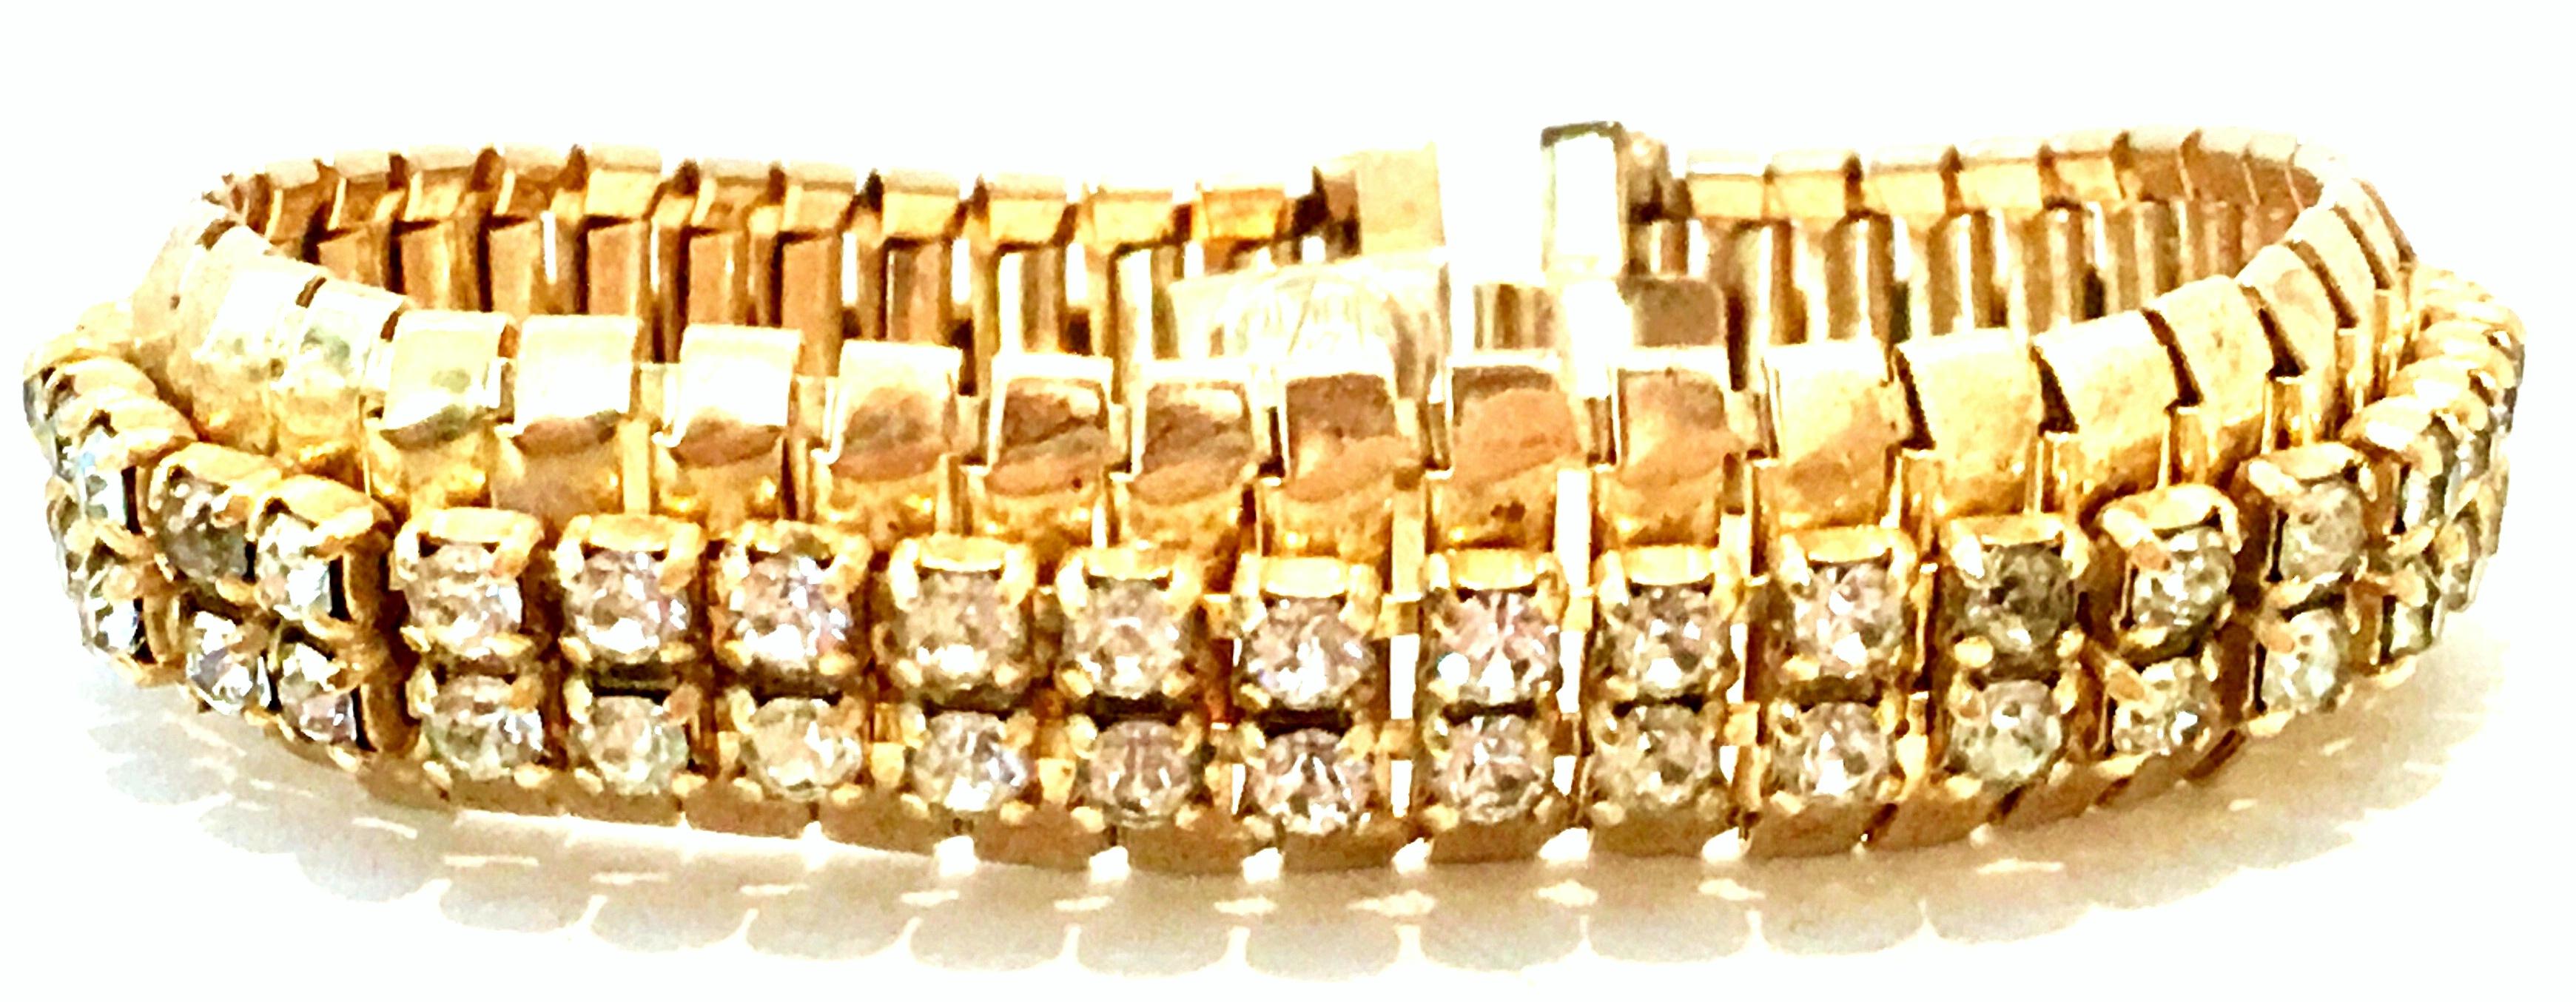 1950'S Gold Plate & Swarovski Crystal Rhinestone Link Bracelet By, Jewels By Julio.
Features prong set crystal clear rhinestones and locking clasp. Signed on the underside, Jewels By Julio.